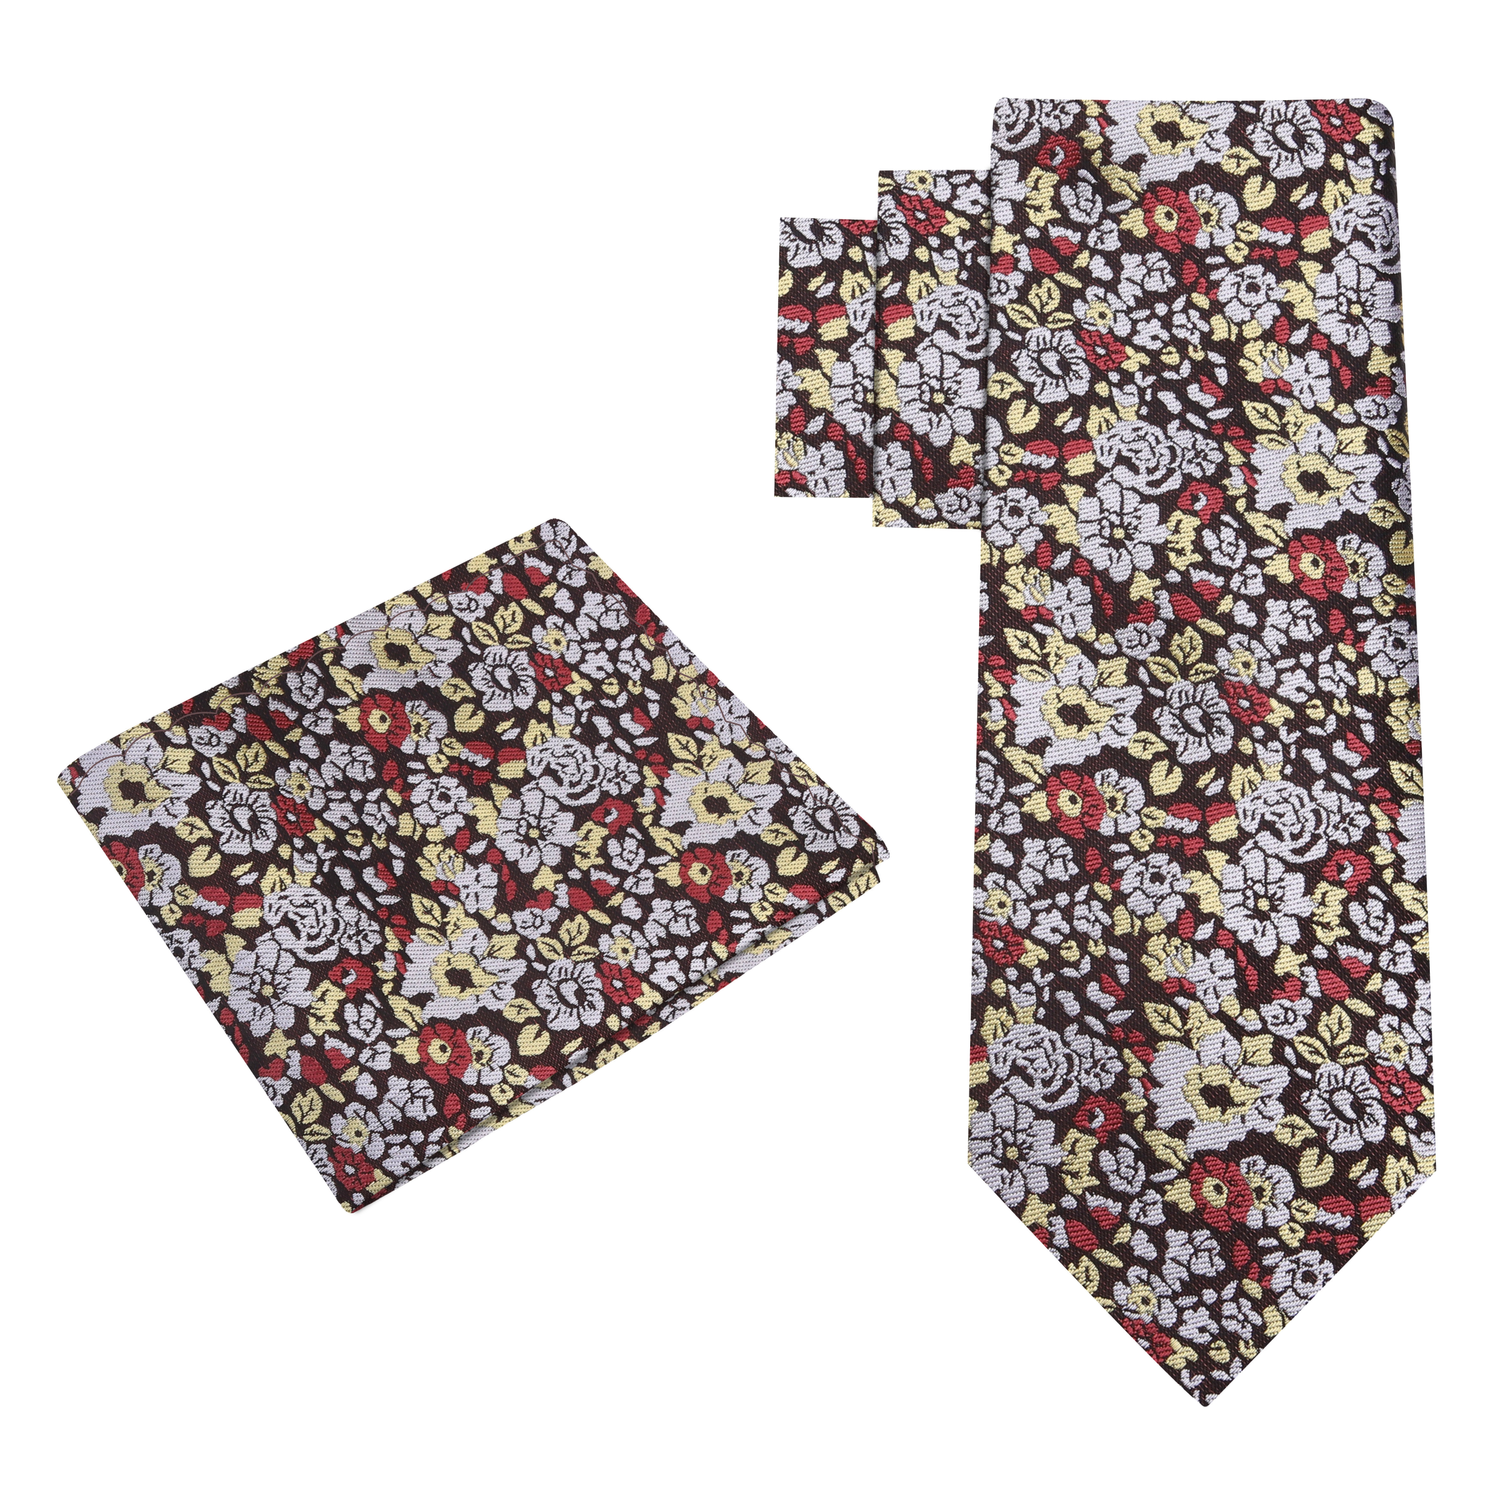 Alt View: Brown, Grey, Light Gold Small Flowers Necktie and Square